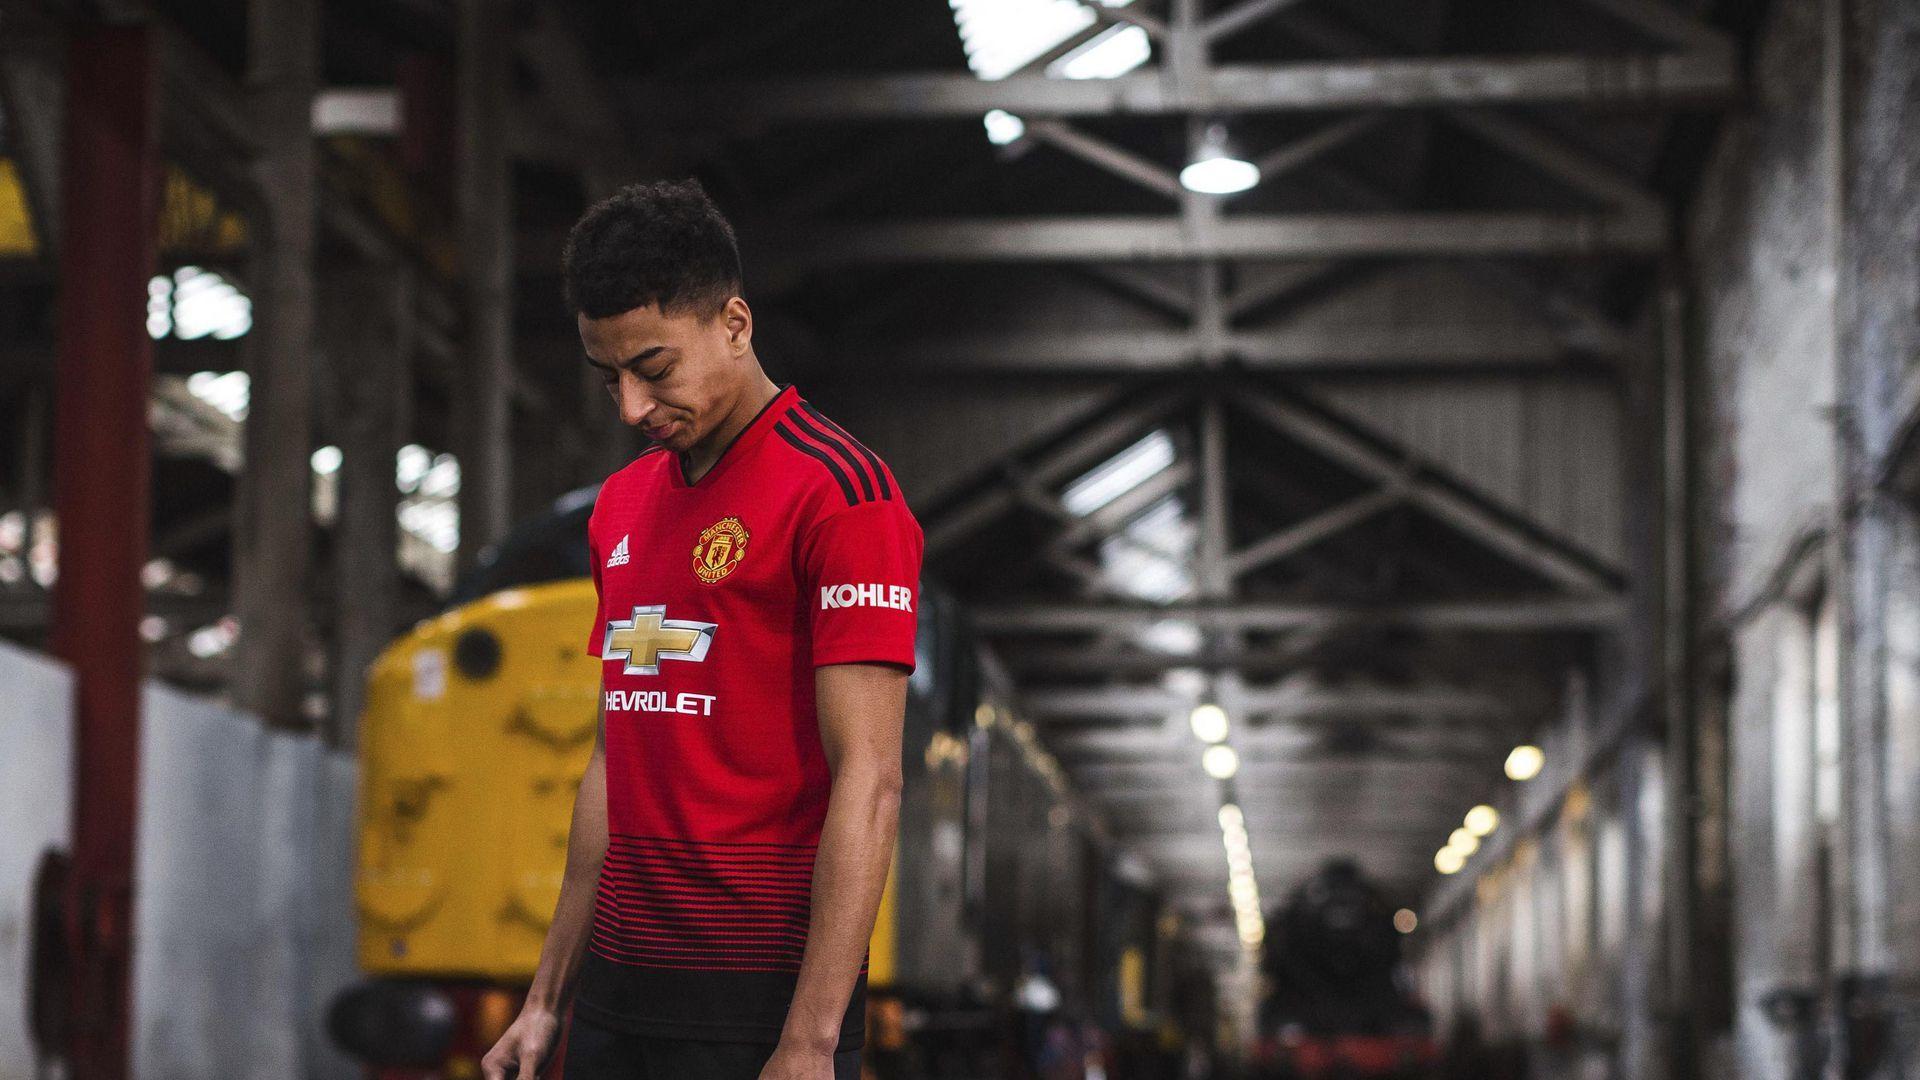 adidas reveals new Manchester United home kit for 2018 19 season